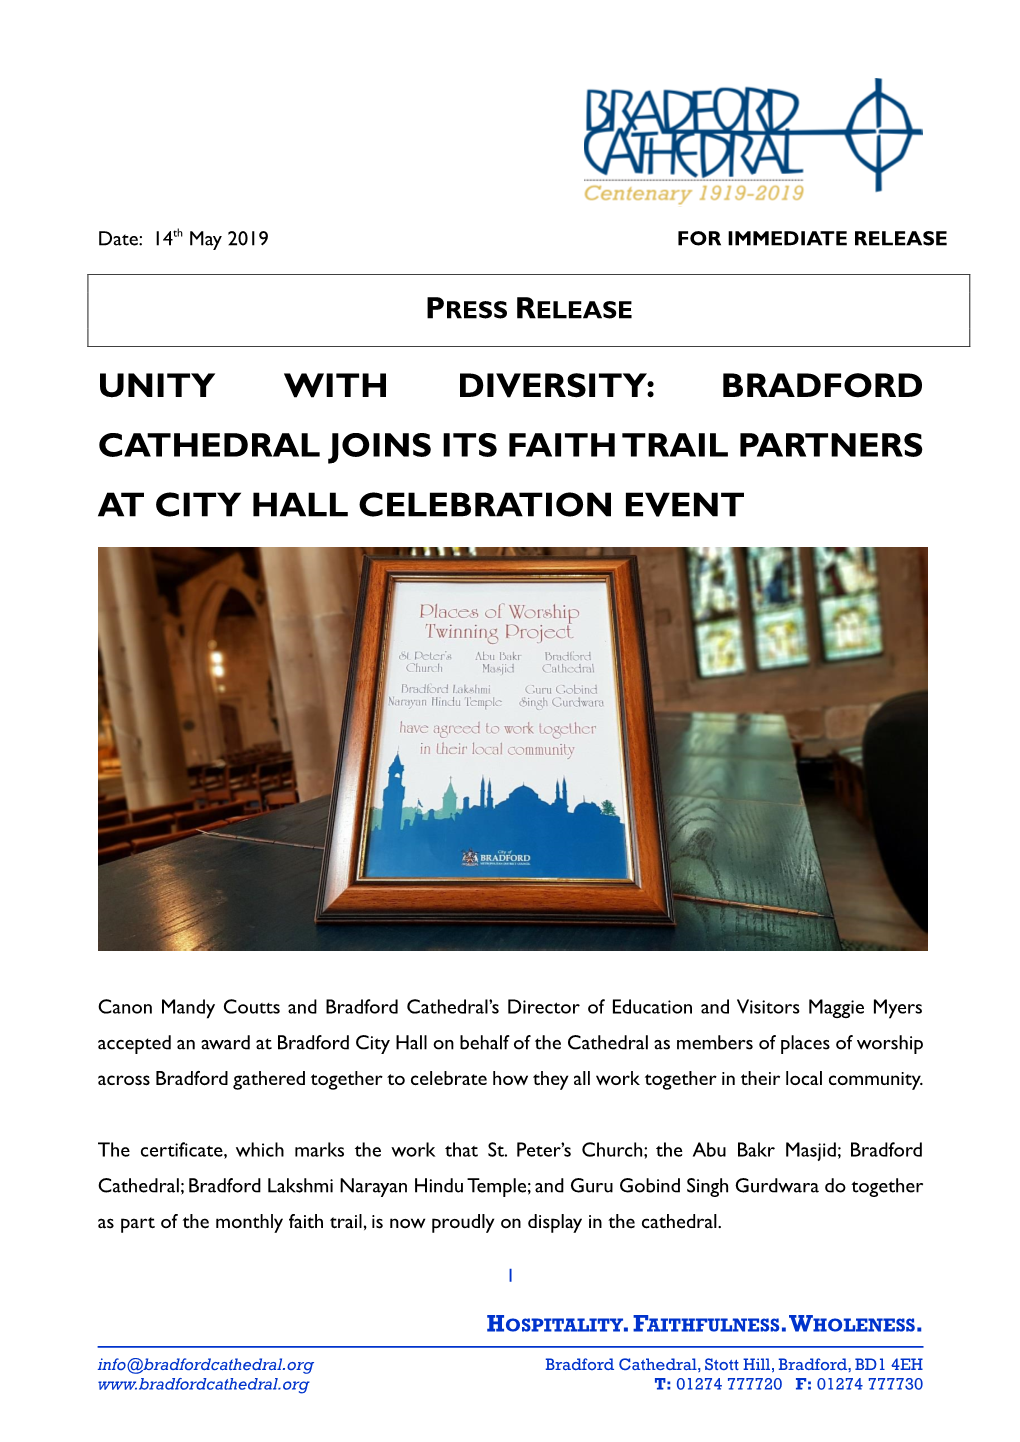 Unity with Diversity: Bradford Cathedral Joins Its Faith Trail Partners at City Hall Celebration Event